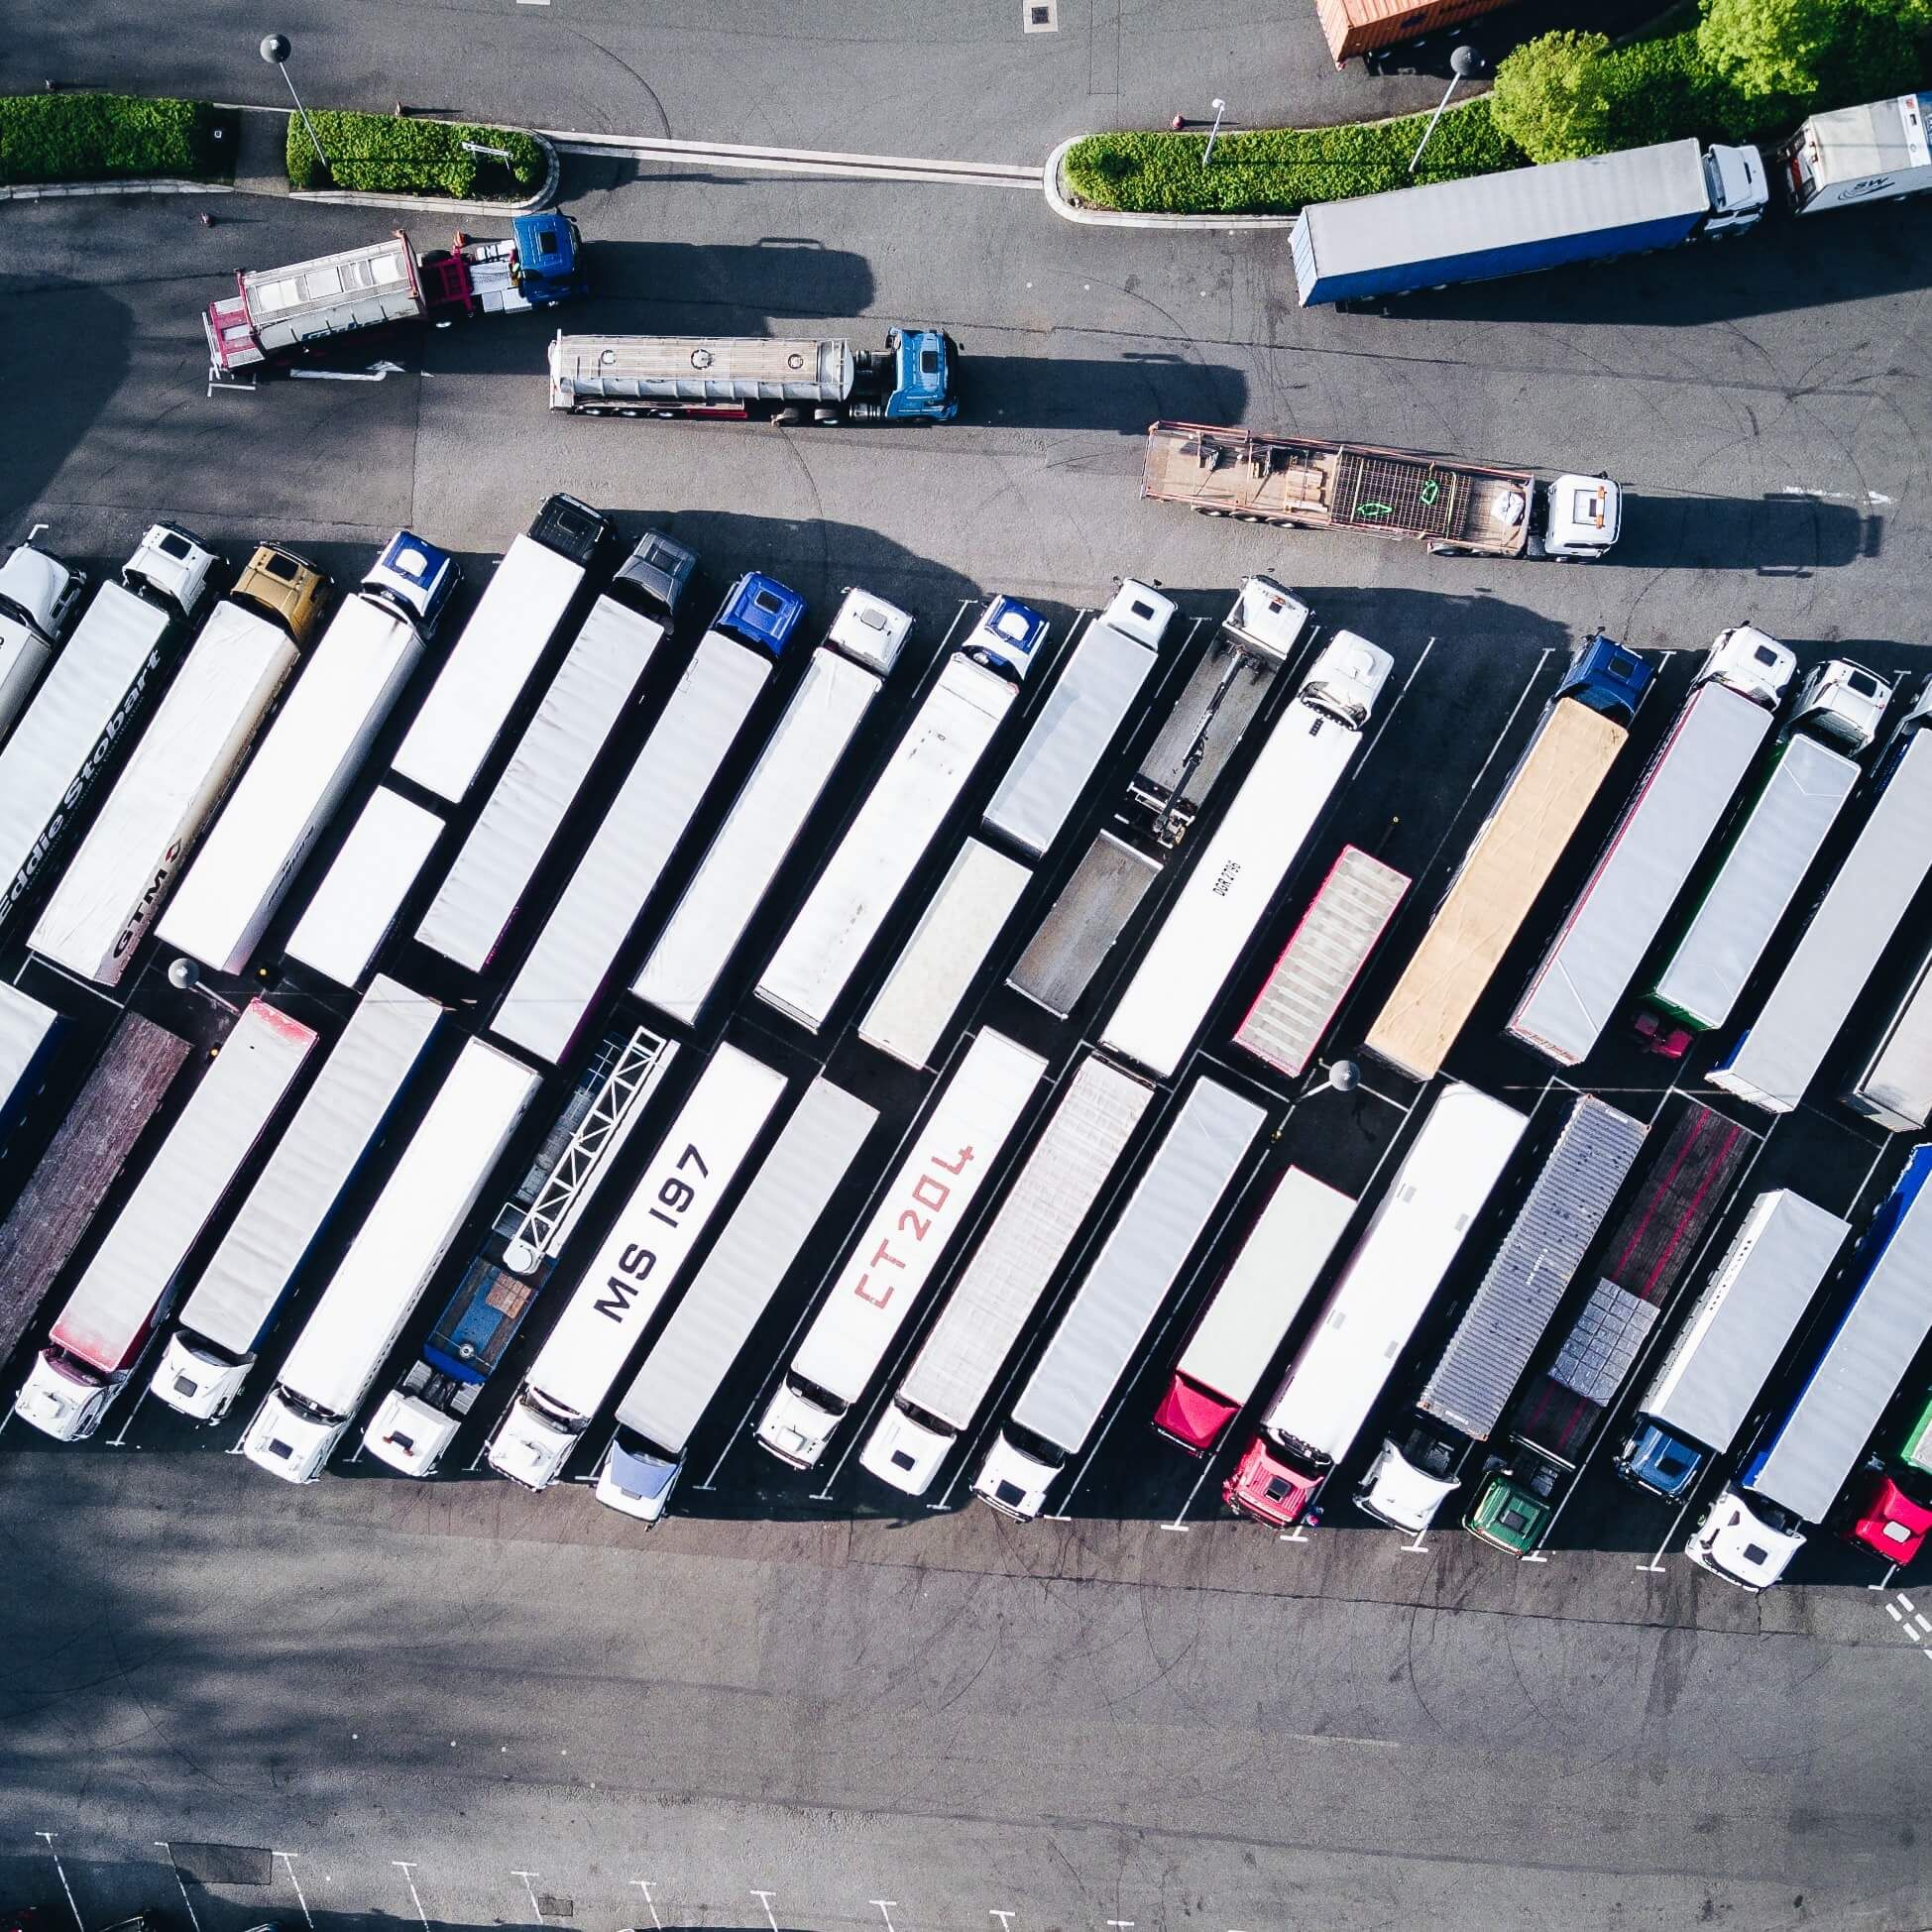 Aerial view of multiple truck fleets